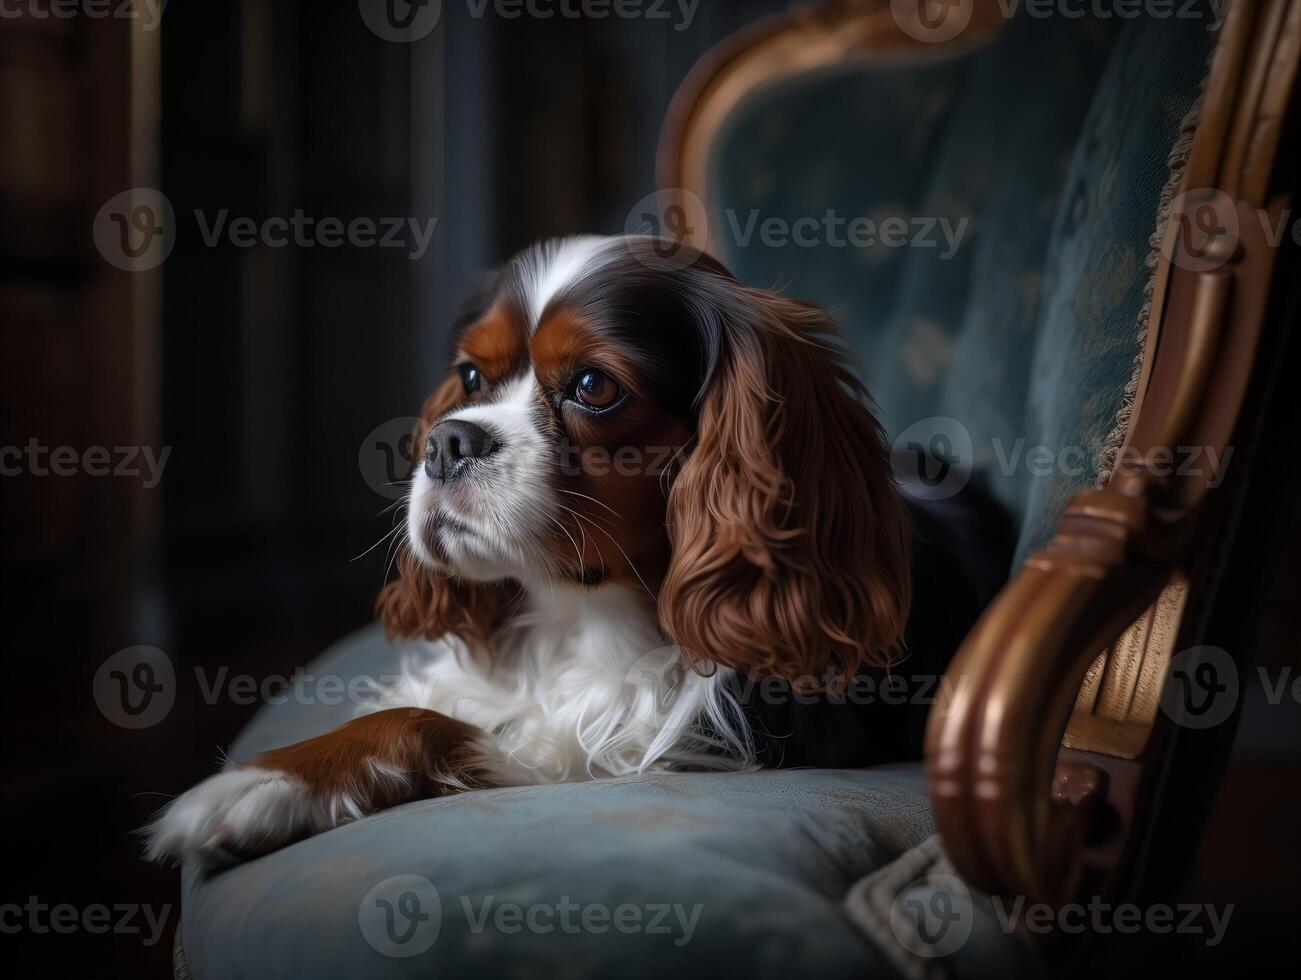 The King Charles Spaniel's Moment of Serenity photo